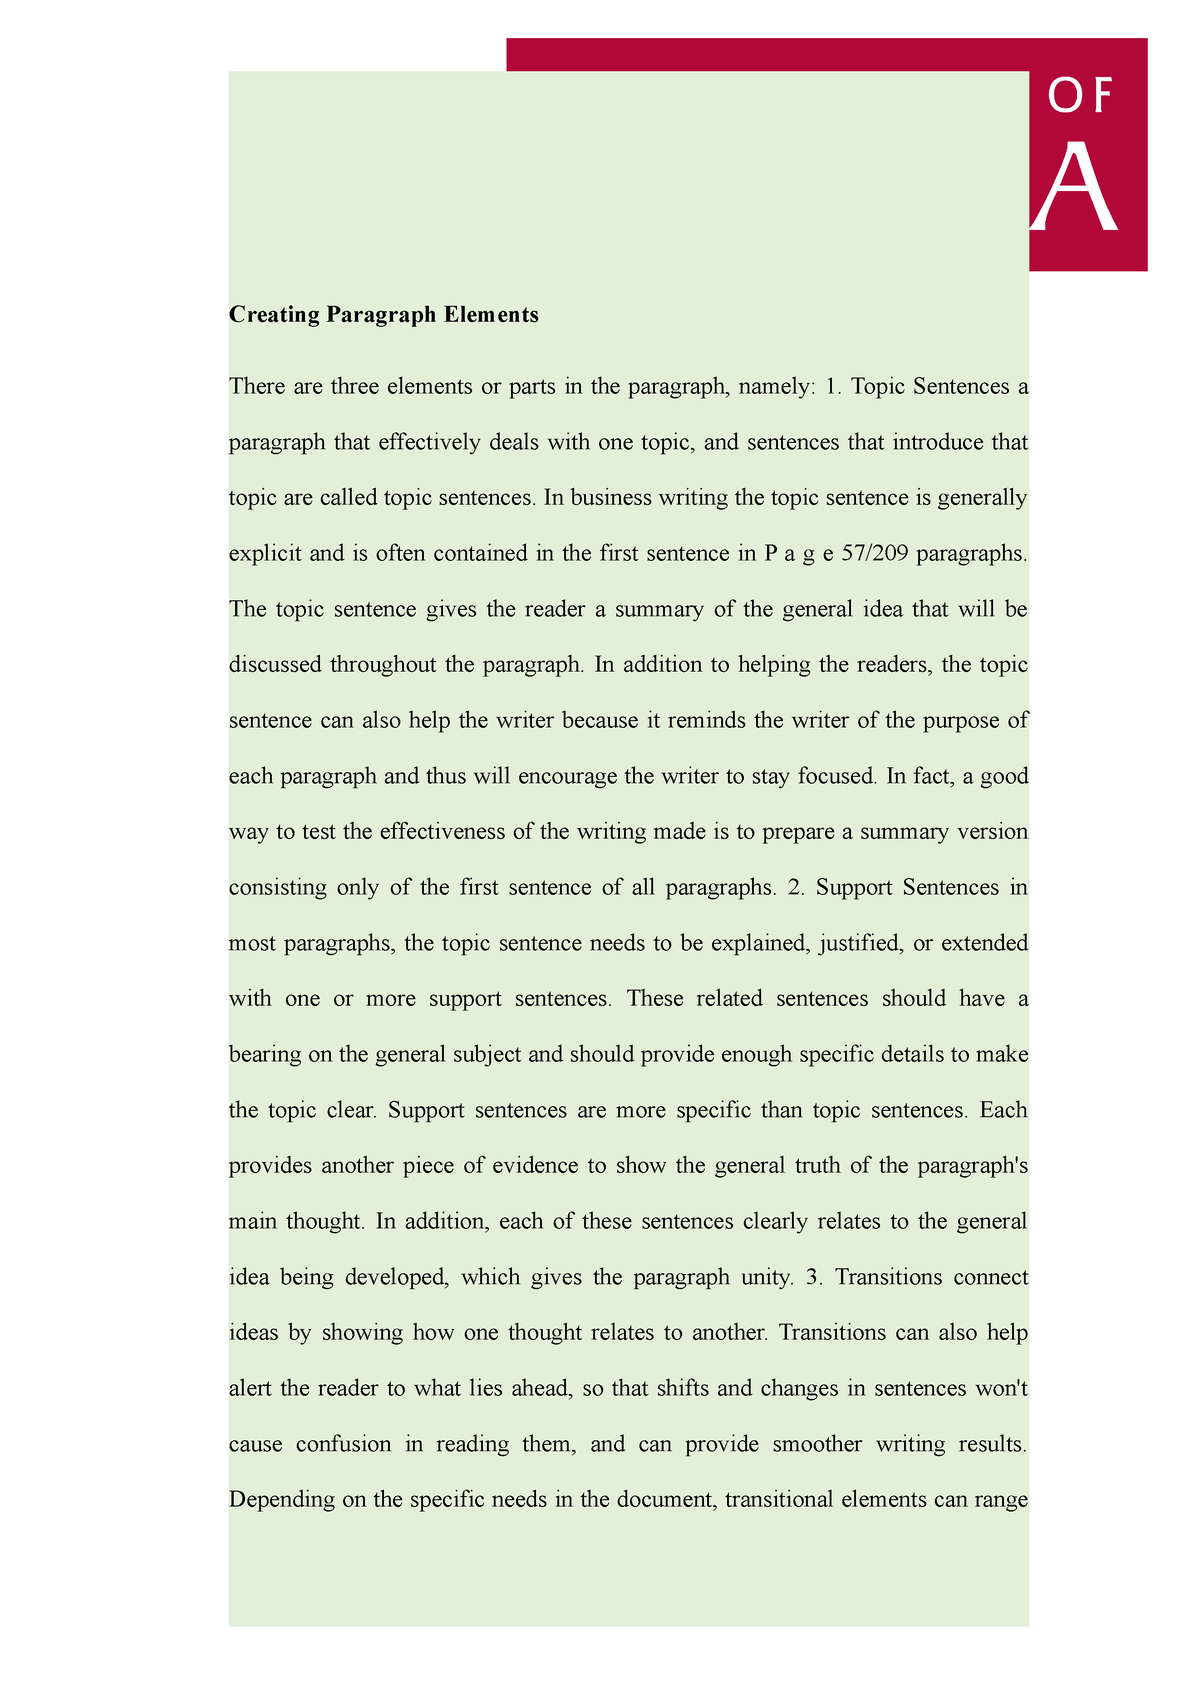 Documents Business - Creating Paragraph Elements - Creating Paragraph ...